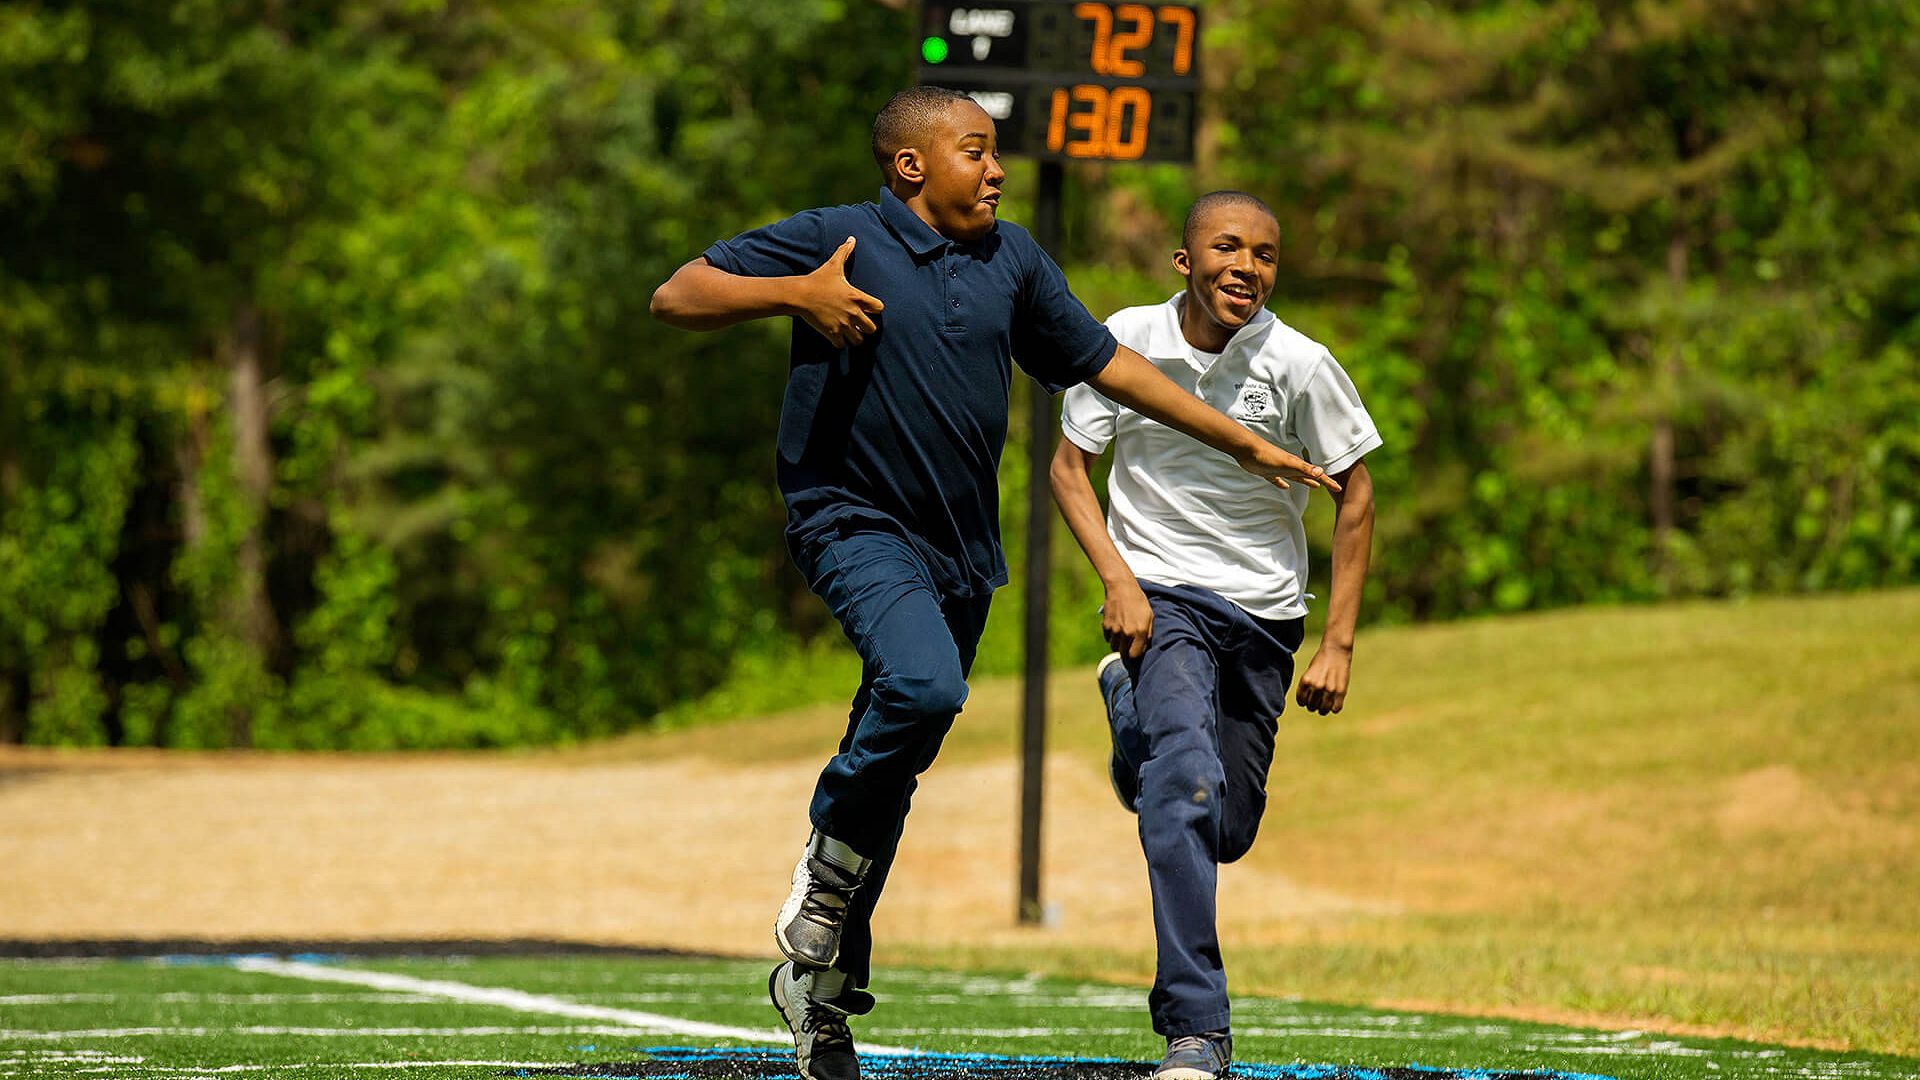 Optional 40-Yard Dash with Timing System promotes fun, friendly competition.